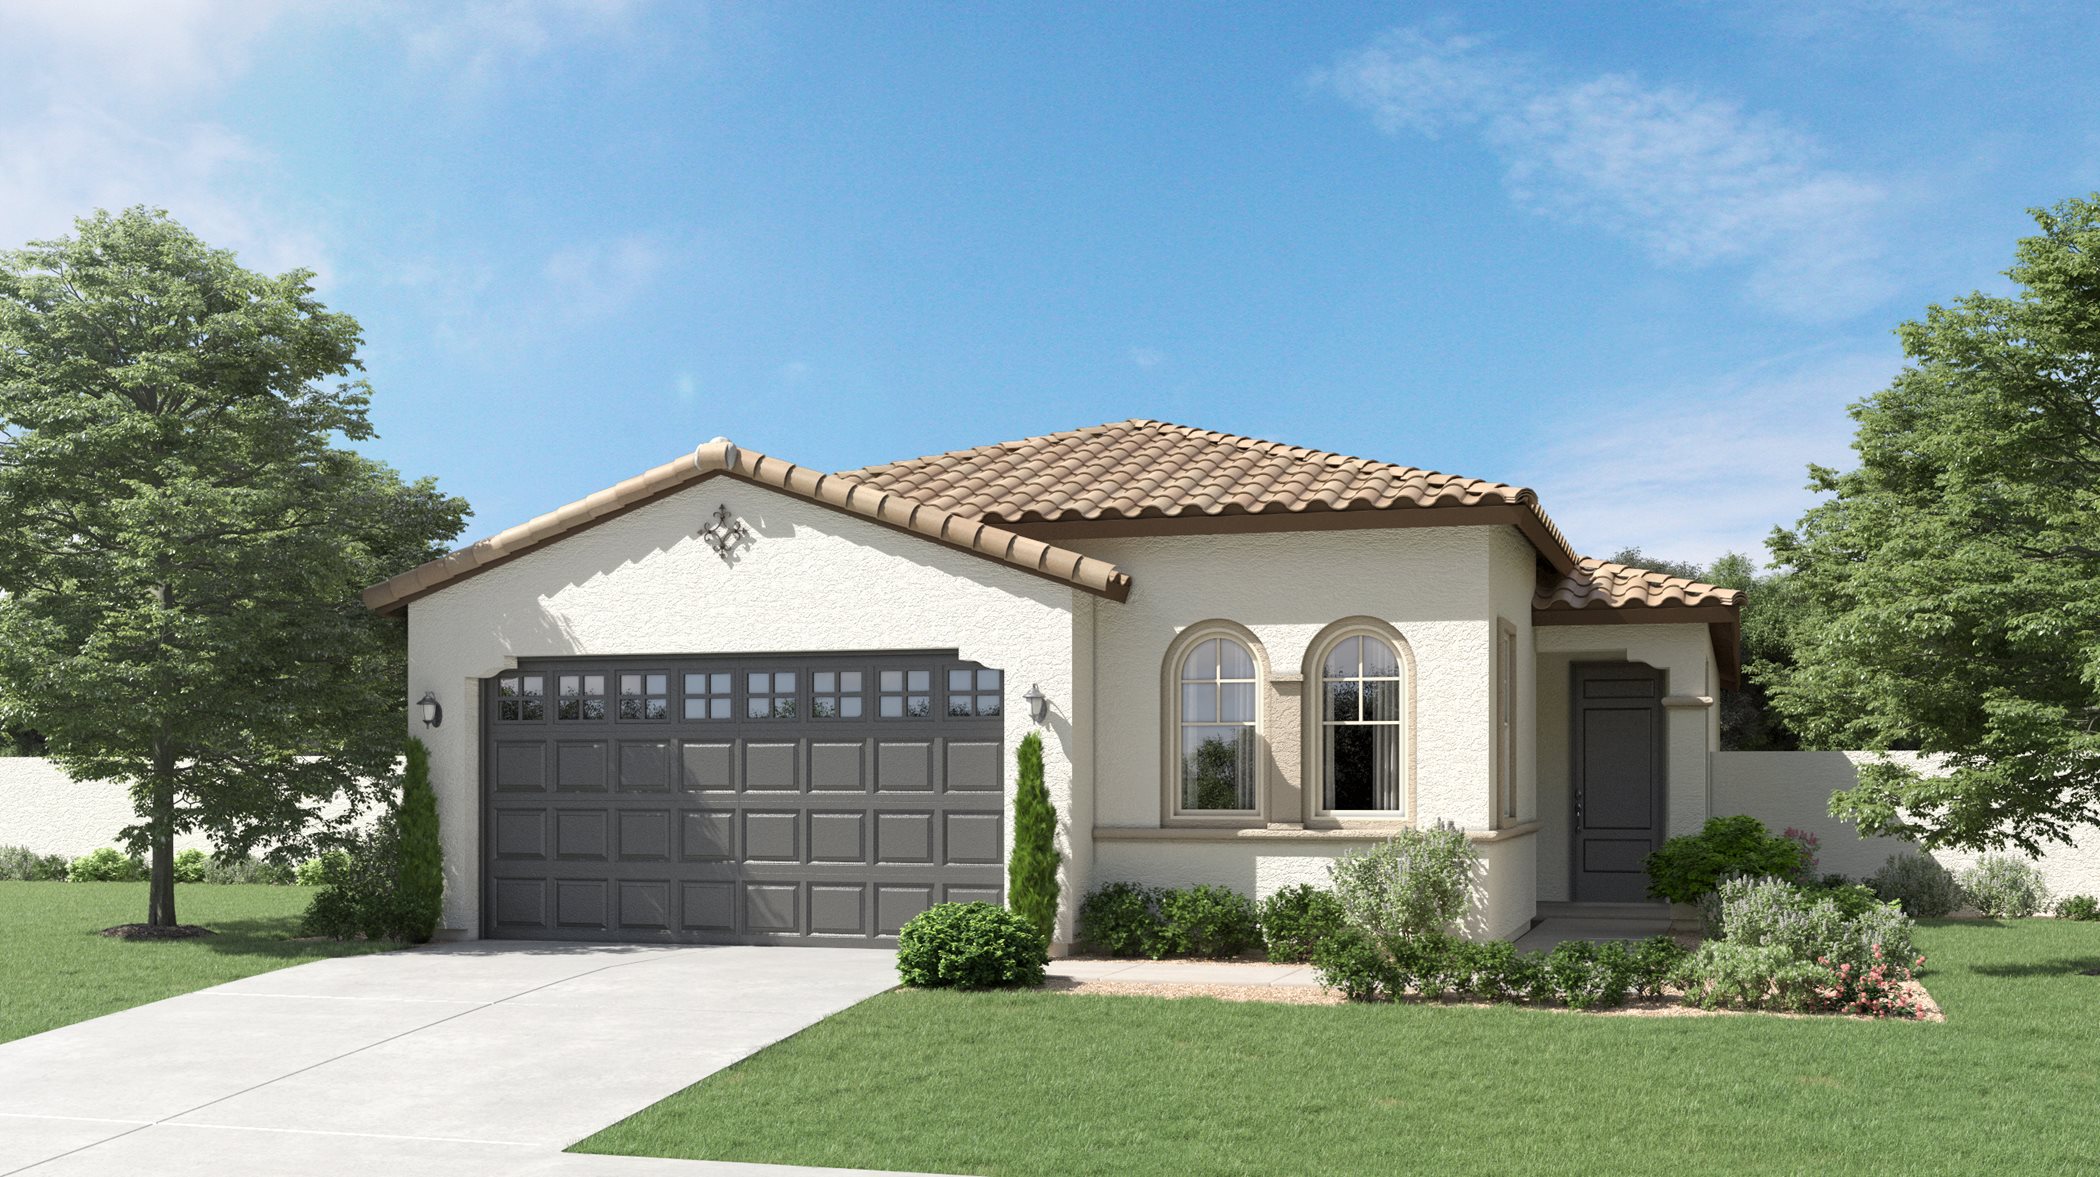 Spanish Colonial Exterior for Plan 3570